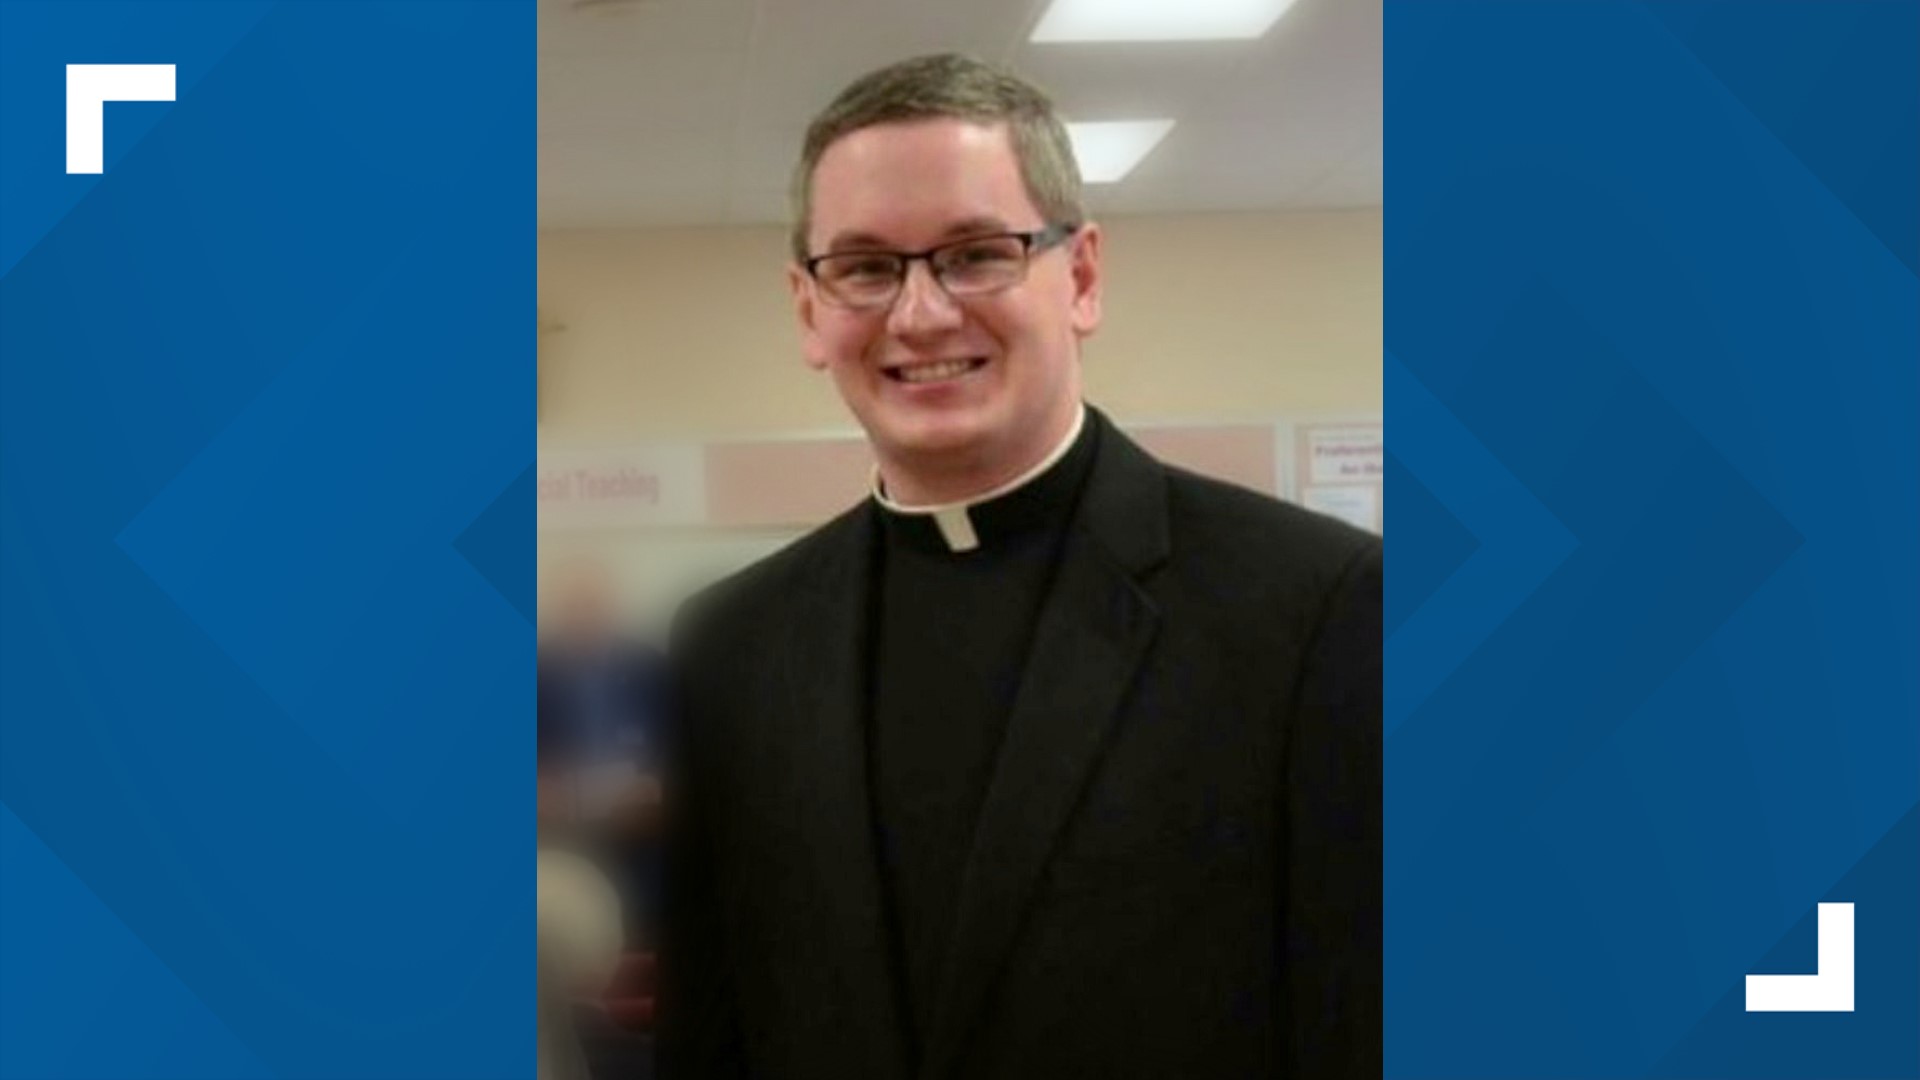 Charges against the priest were filed in 2018